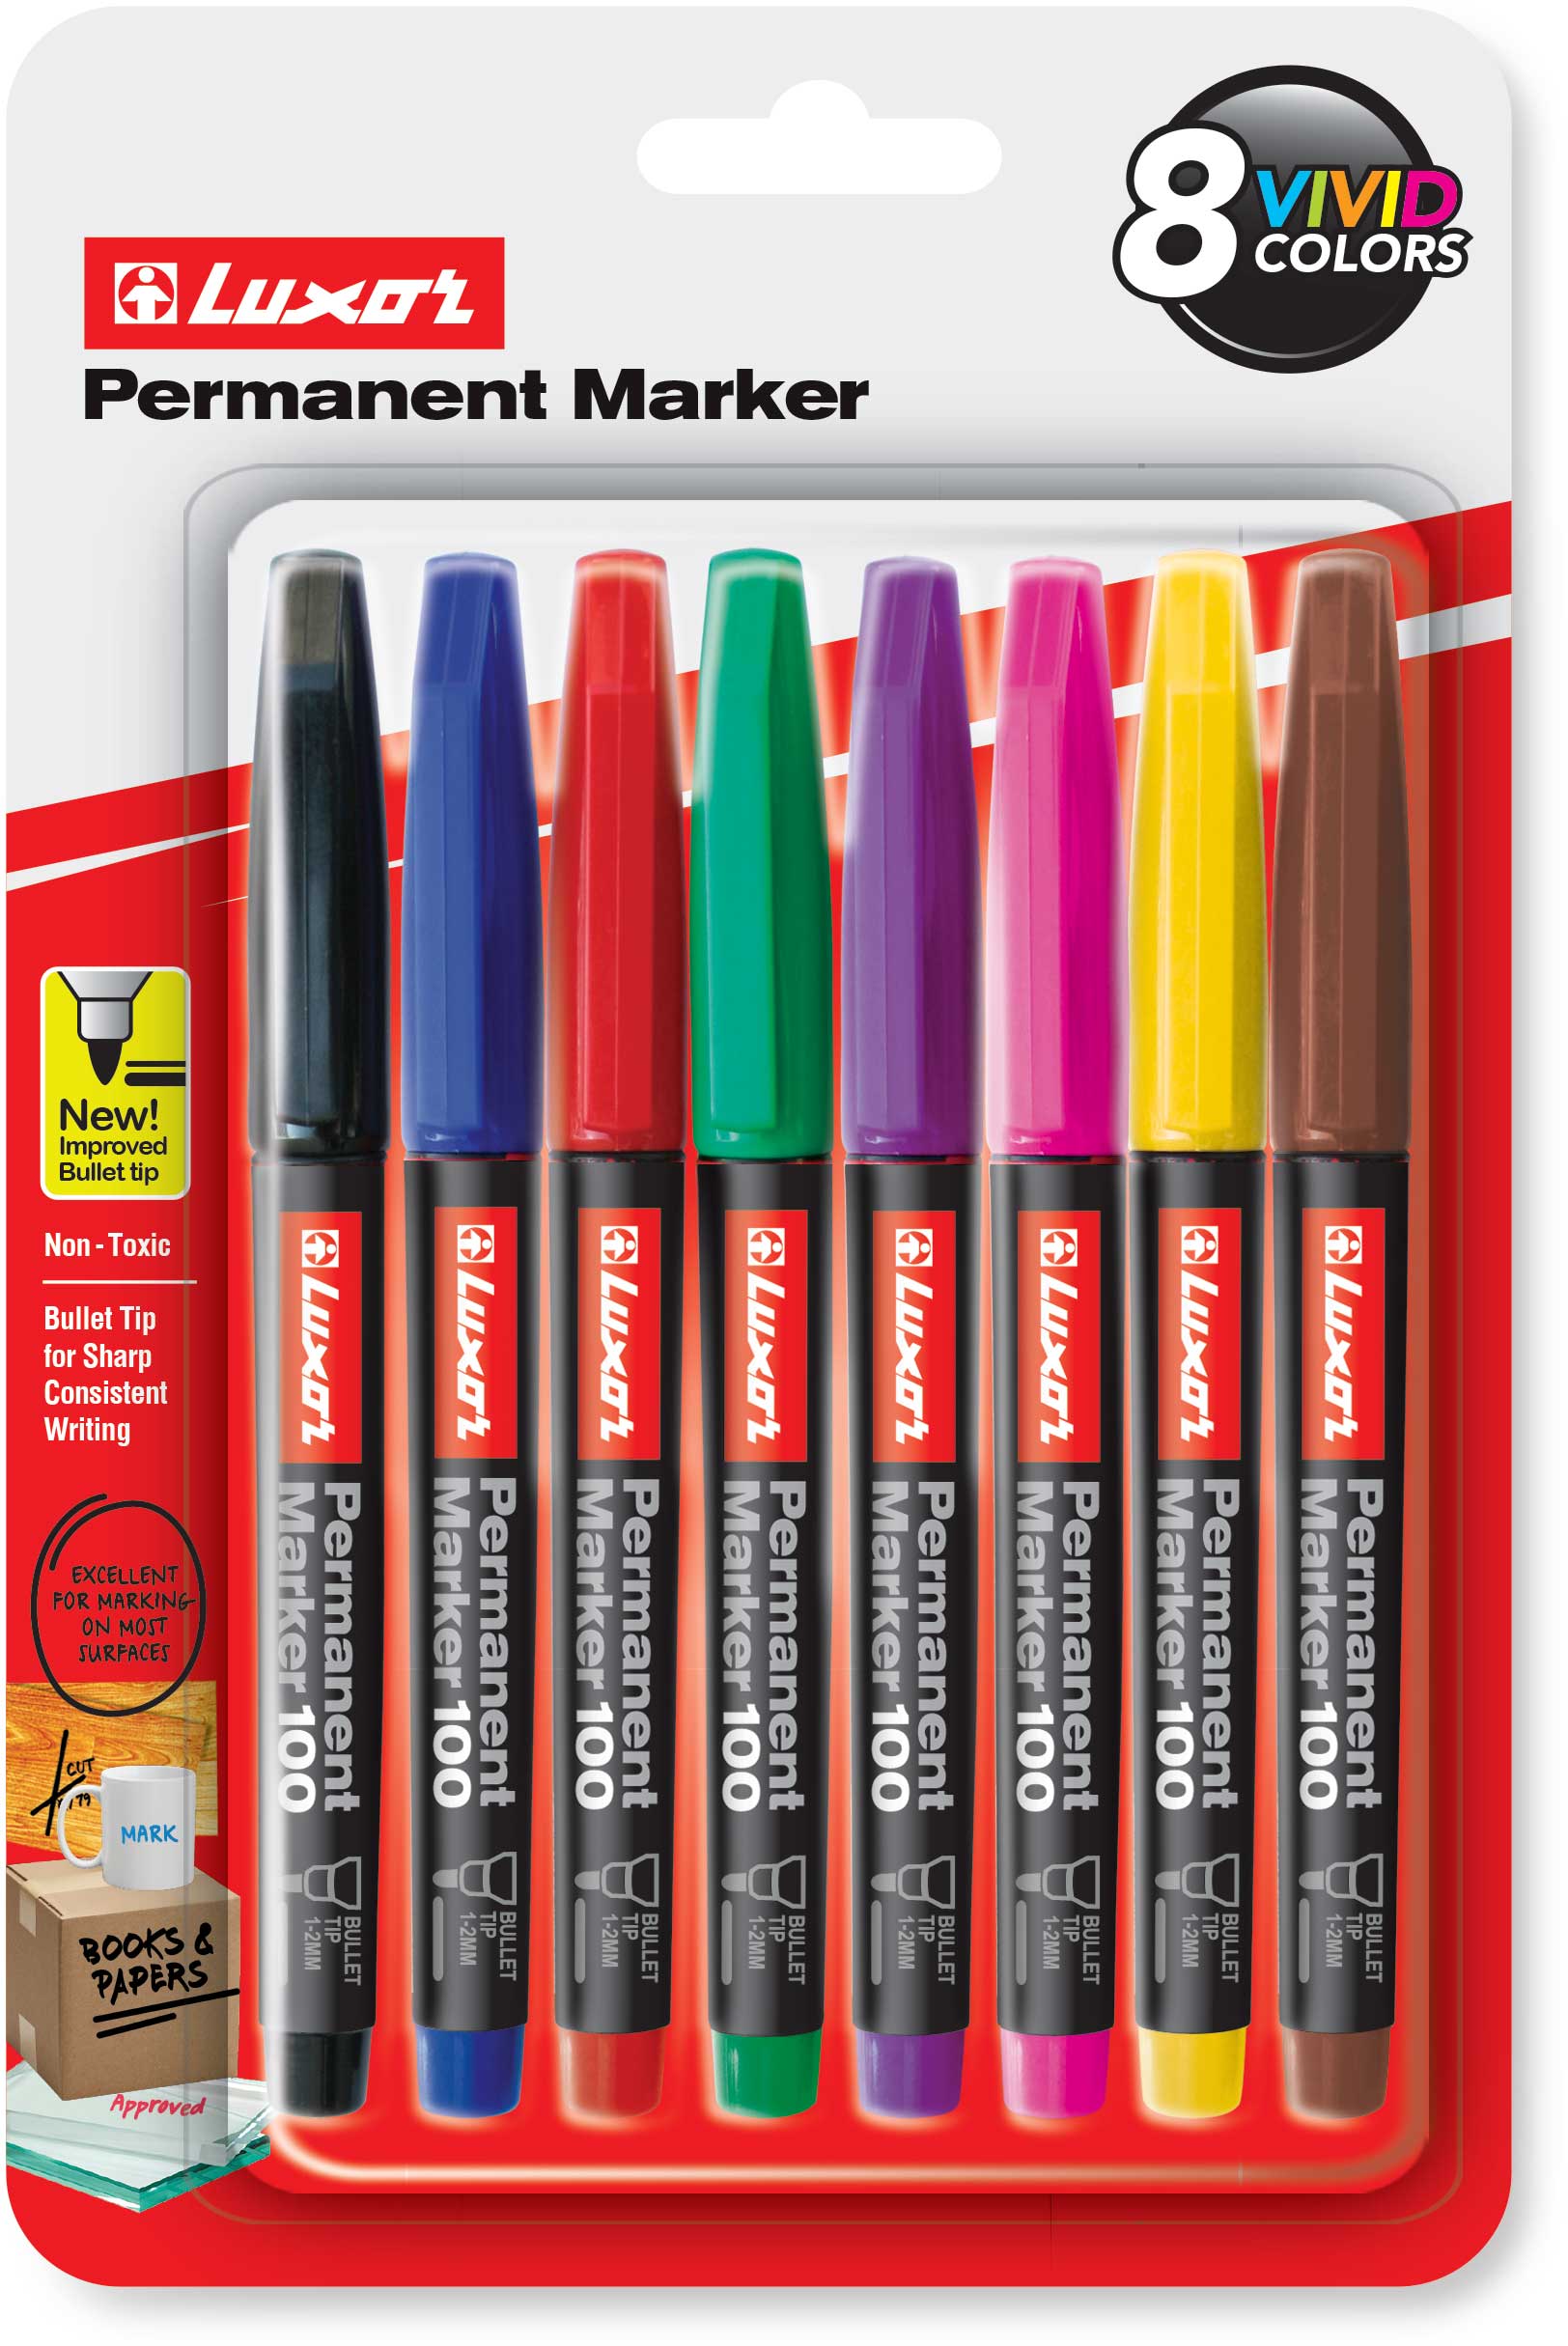 1-2 6 COLOUR SET*IDEAL FOR BACK TO SCHOOL* LUXOR PERMANENT MARKERS MEDIUM NIB 